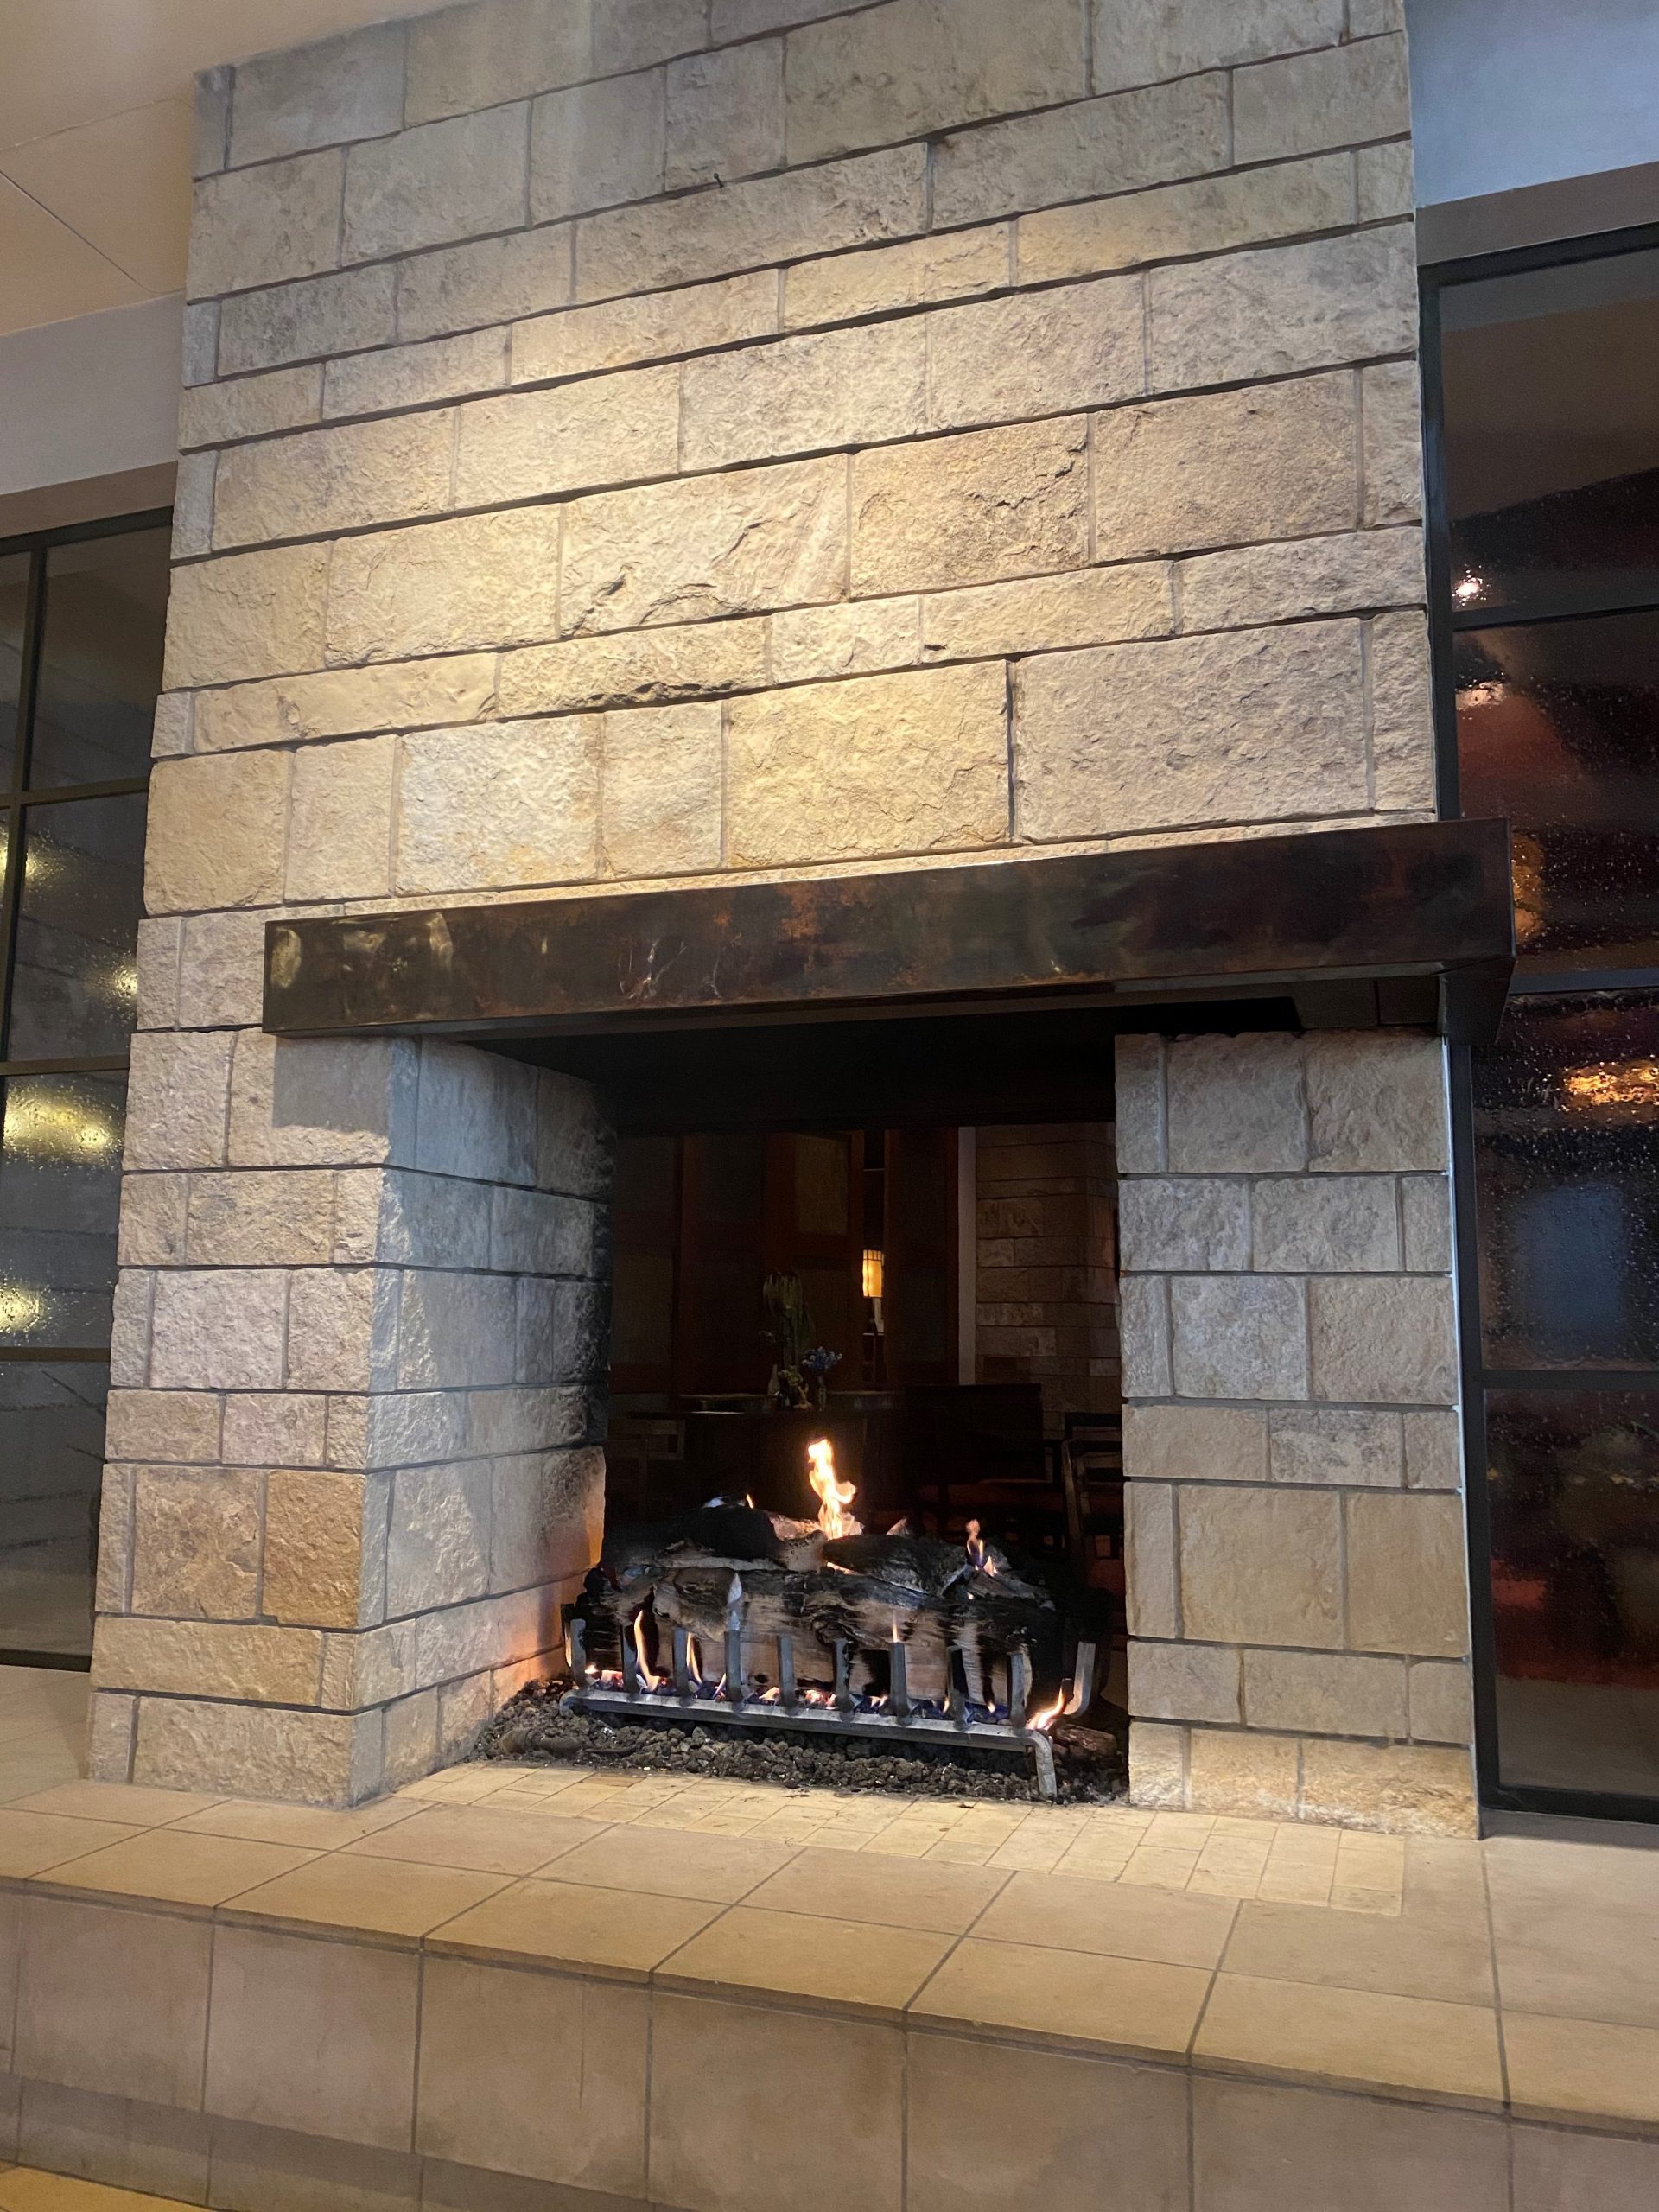 Repair My Fireplace S Fire Brick, How To Repair Outdoor Brick Fireplace